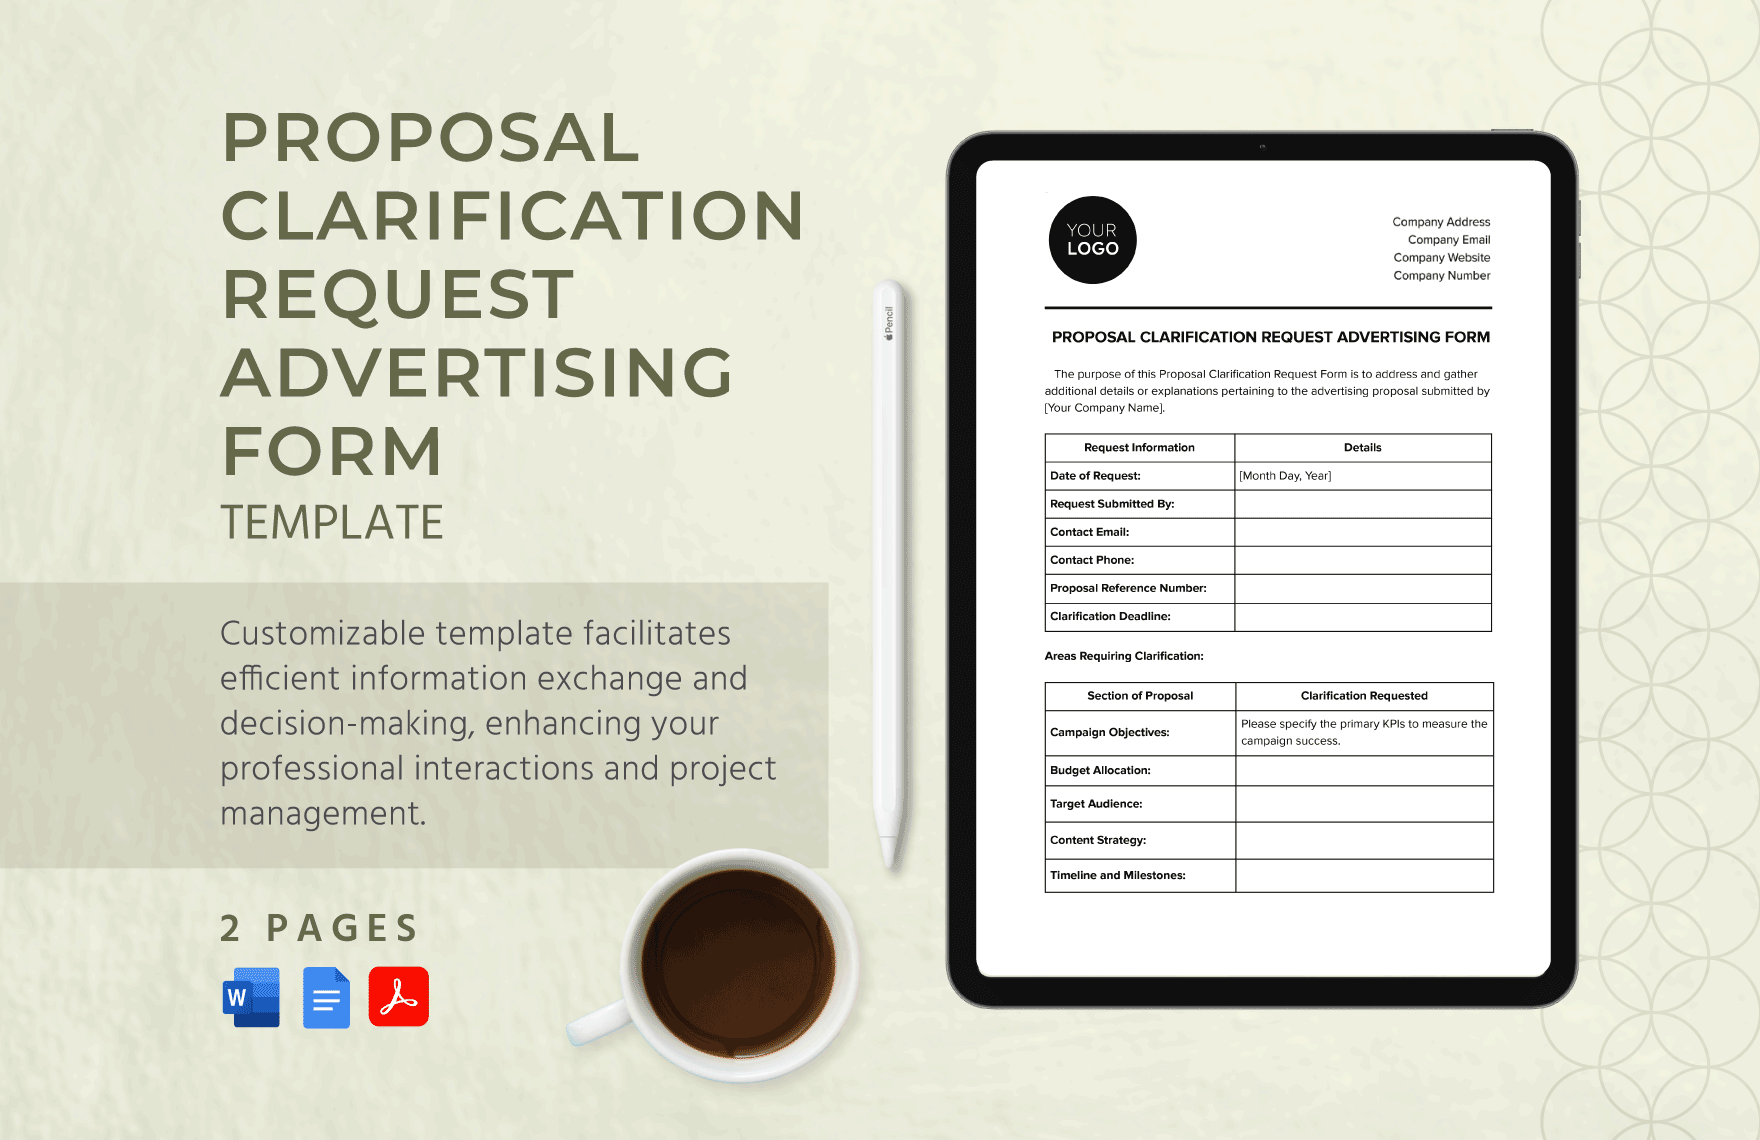 Proposal Clarification Request Advertising Form Template in Word, Google Docs, PDF